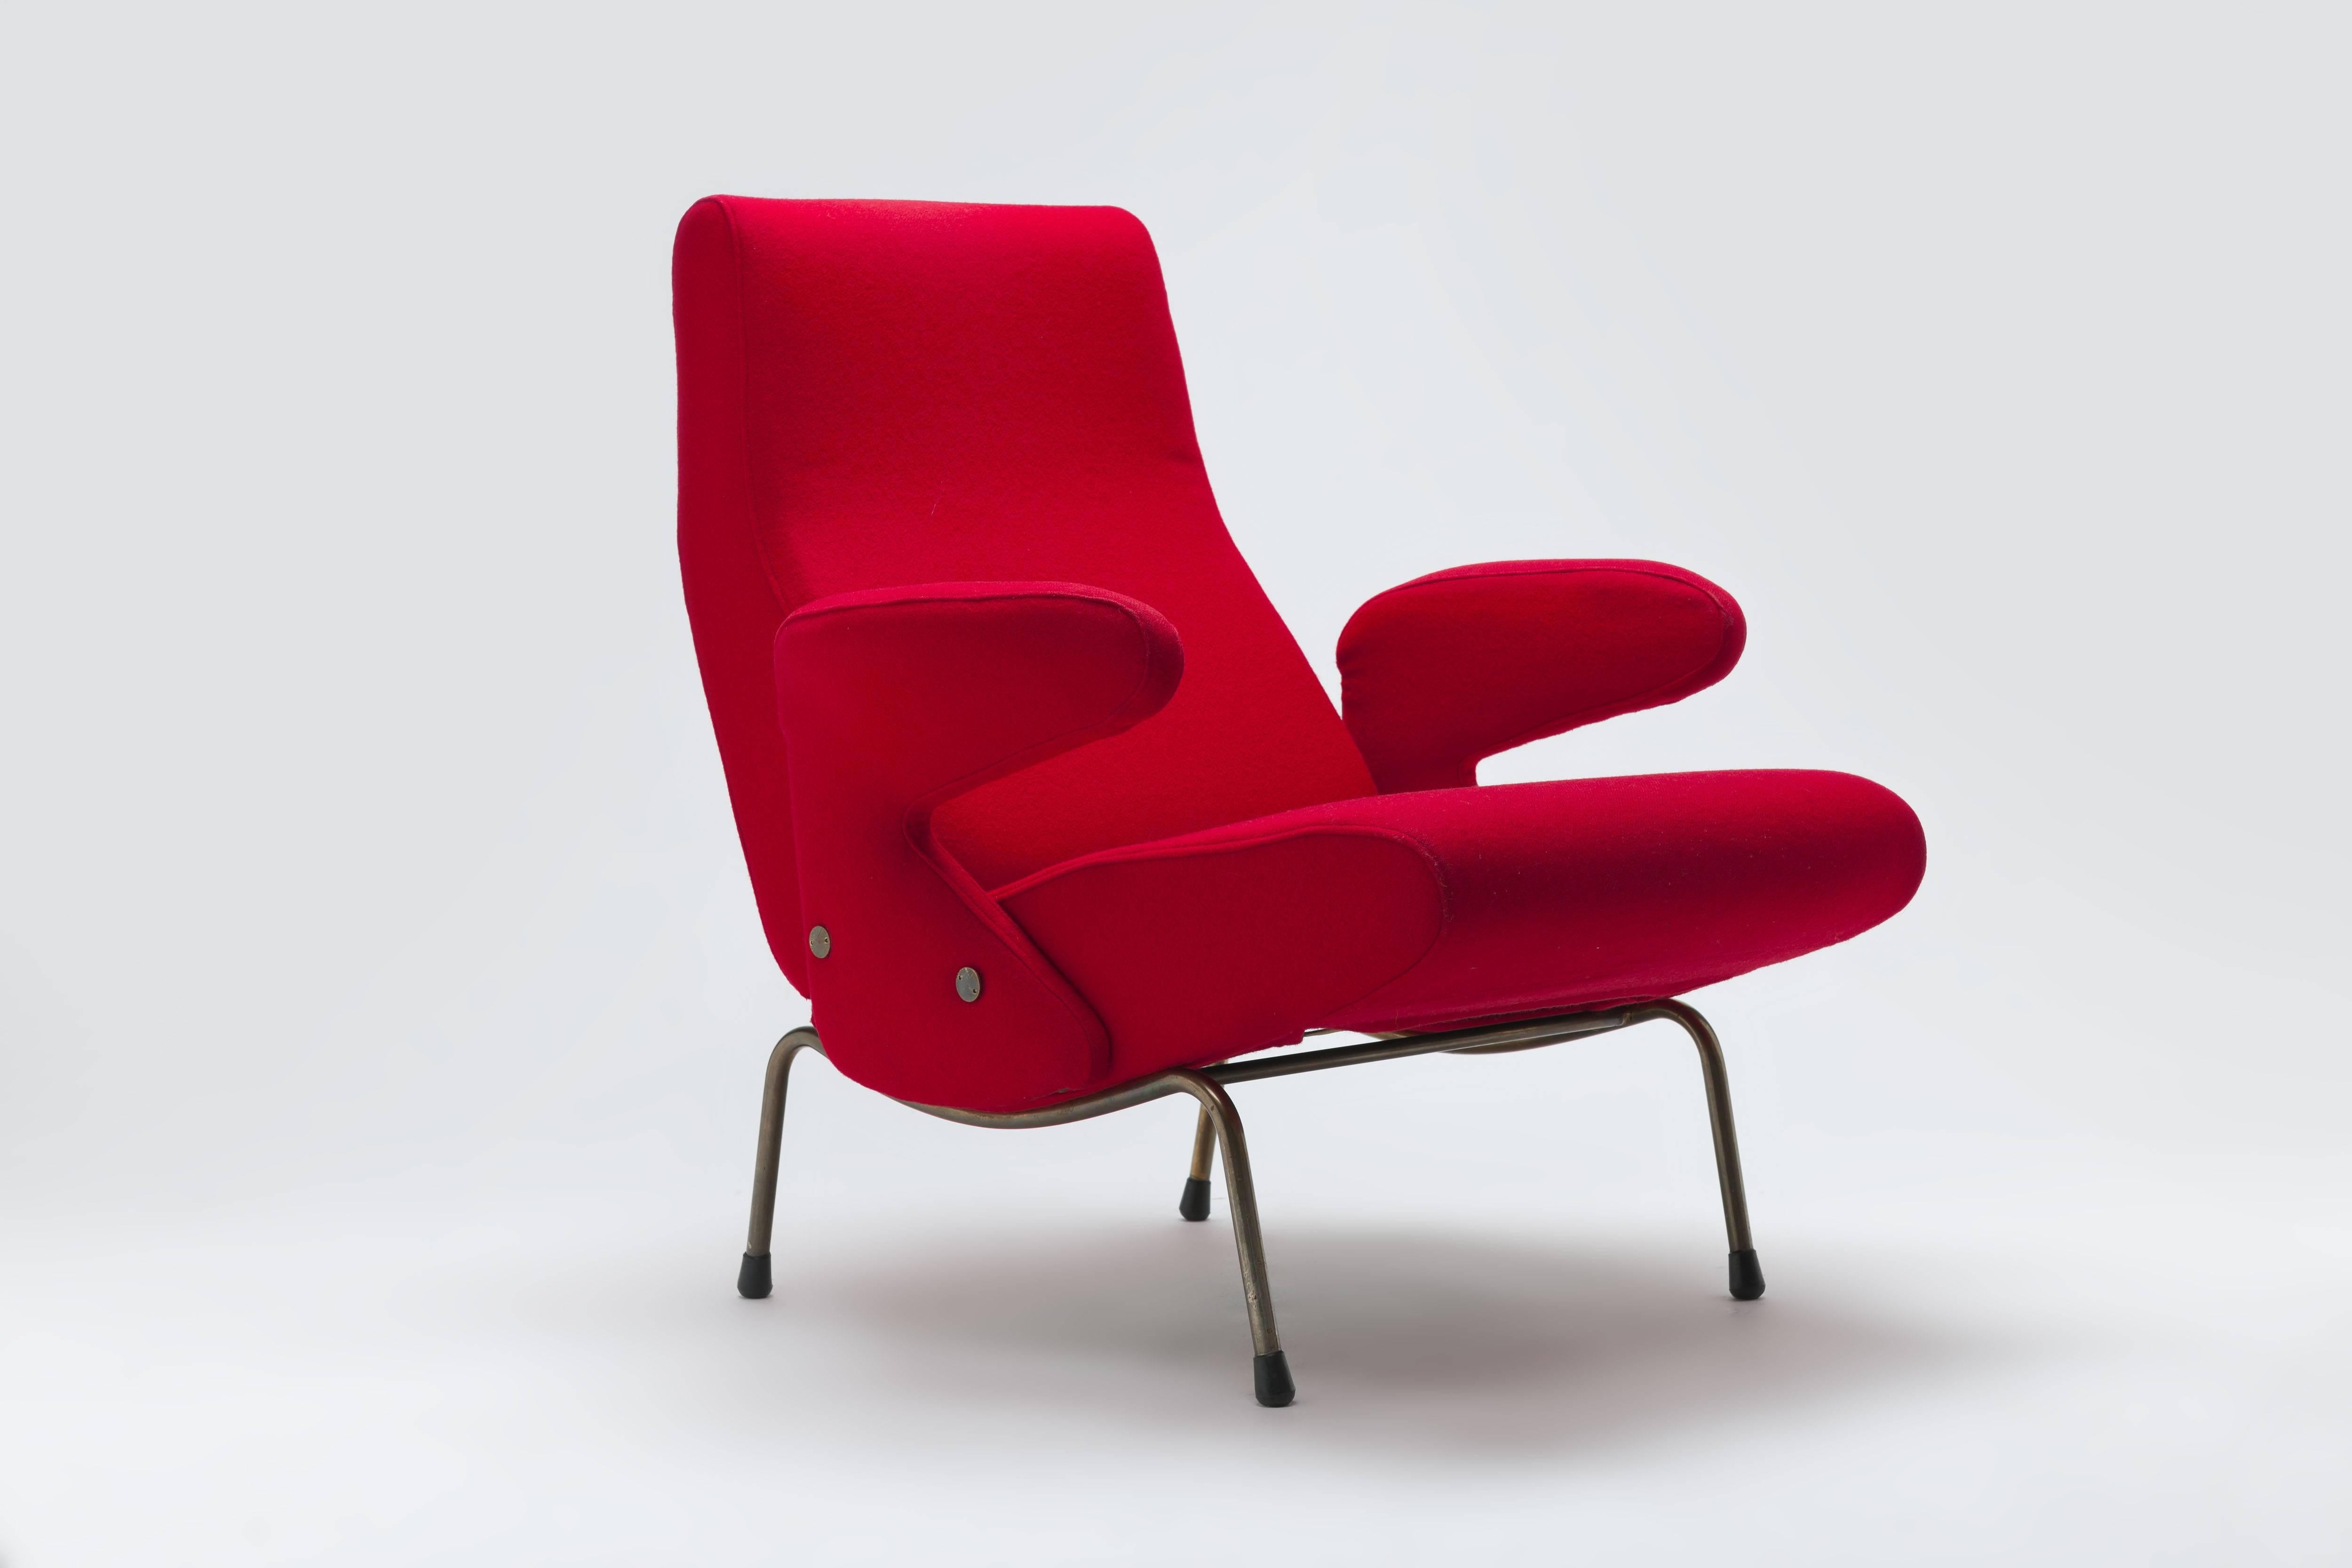 Striking Delfino (Dolphin) lounge chair with remarkable yet comfy armrests designed in 1954 by Italian artist, sculptor and designer Erberto Carboni (1899-1984) for Arflex, Italy. 
This chair dates from the early production period, executed with